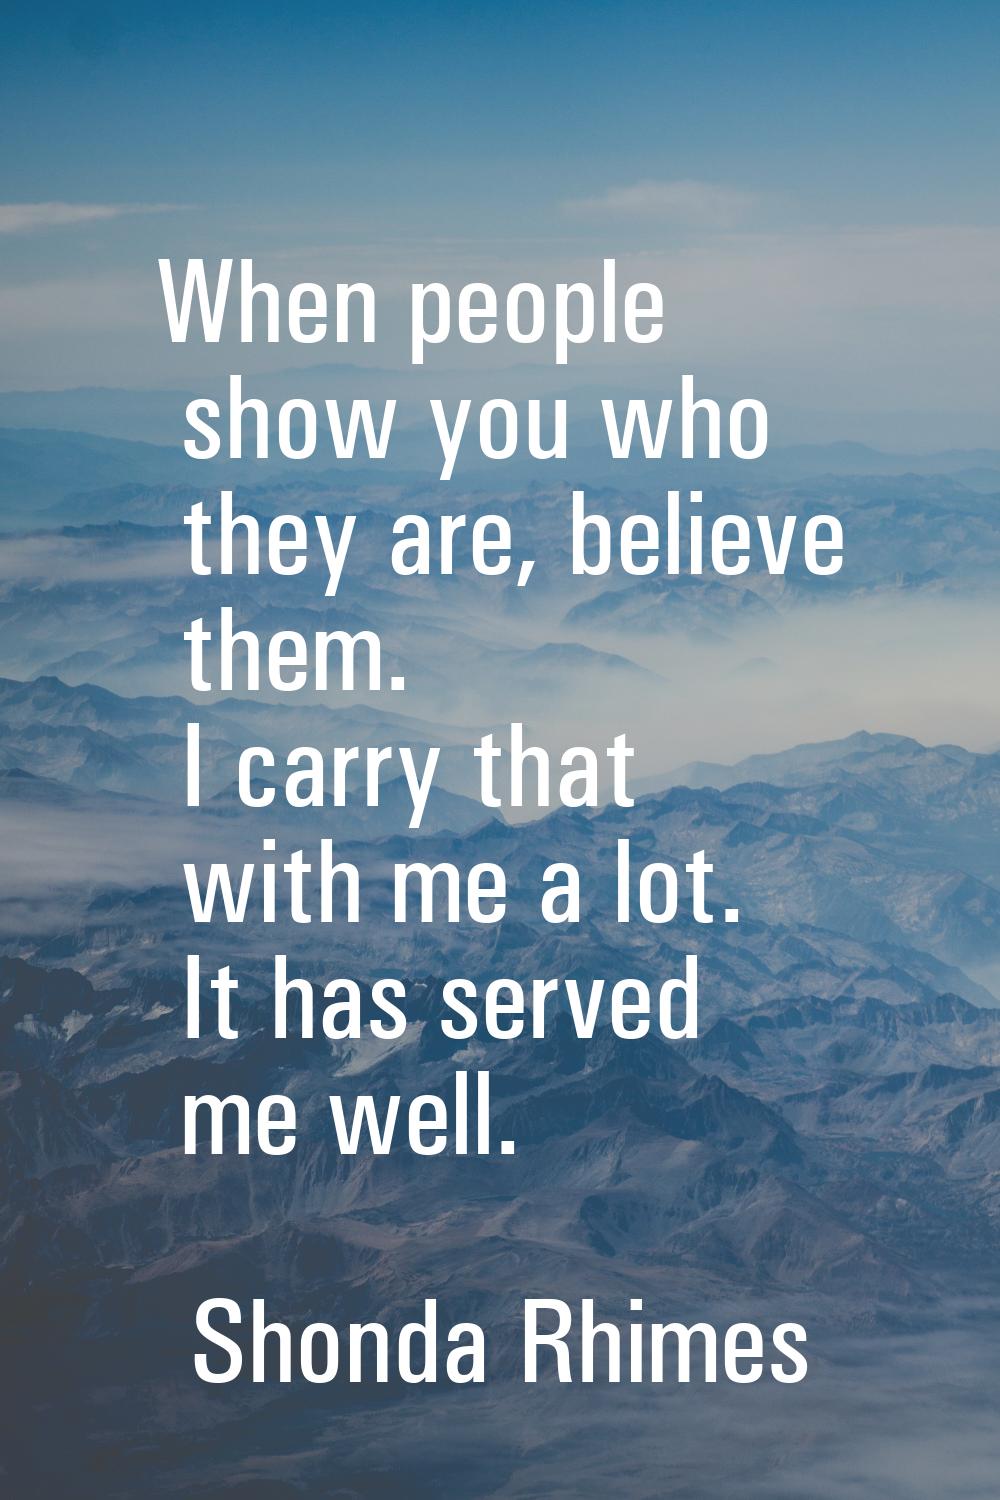 When people show you who they are, believe them. I carry that with me a lot. It has served me well.